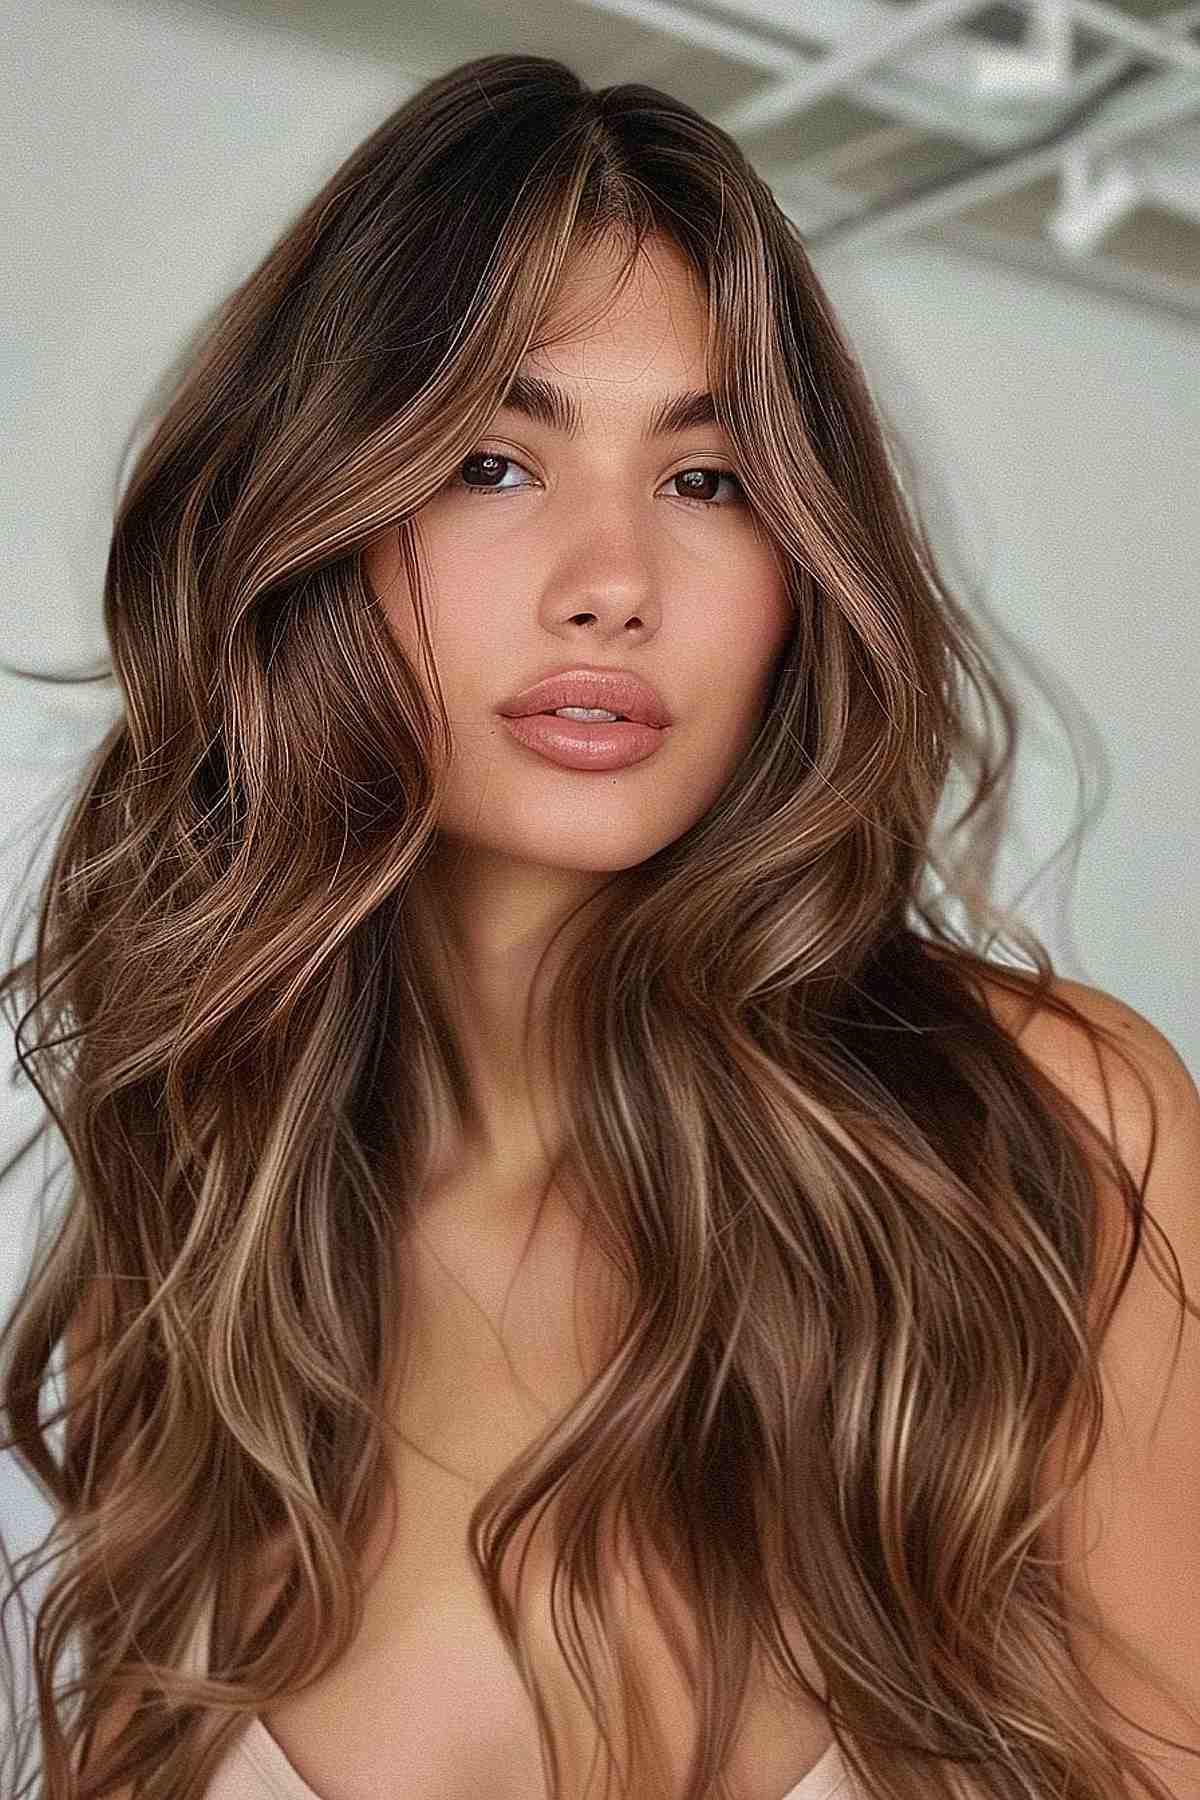 Long, wavy mushroom brown hair featuring a lighter "money piece" highlight around the face, enhancing the overall style with a modern twist.